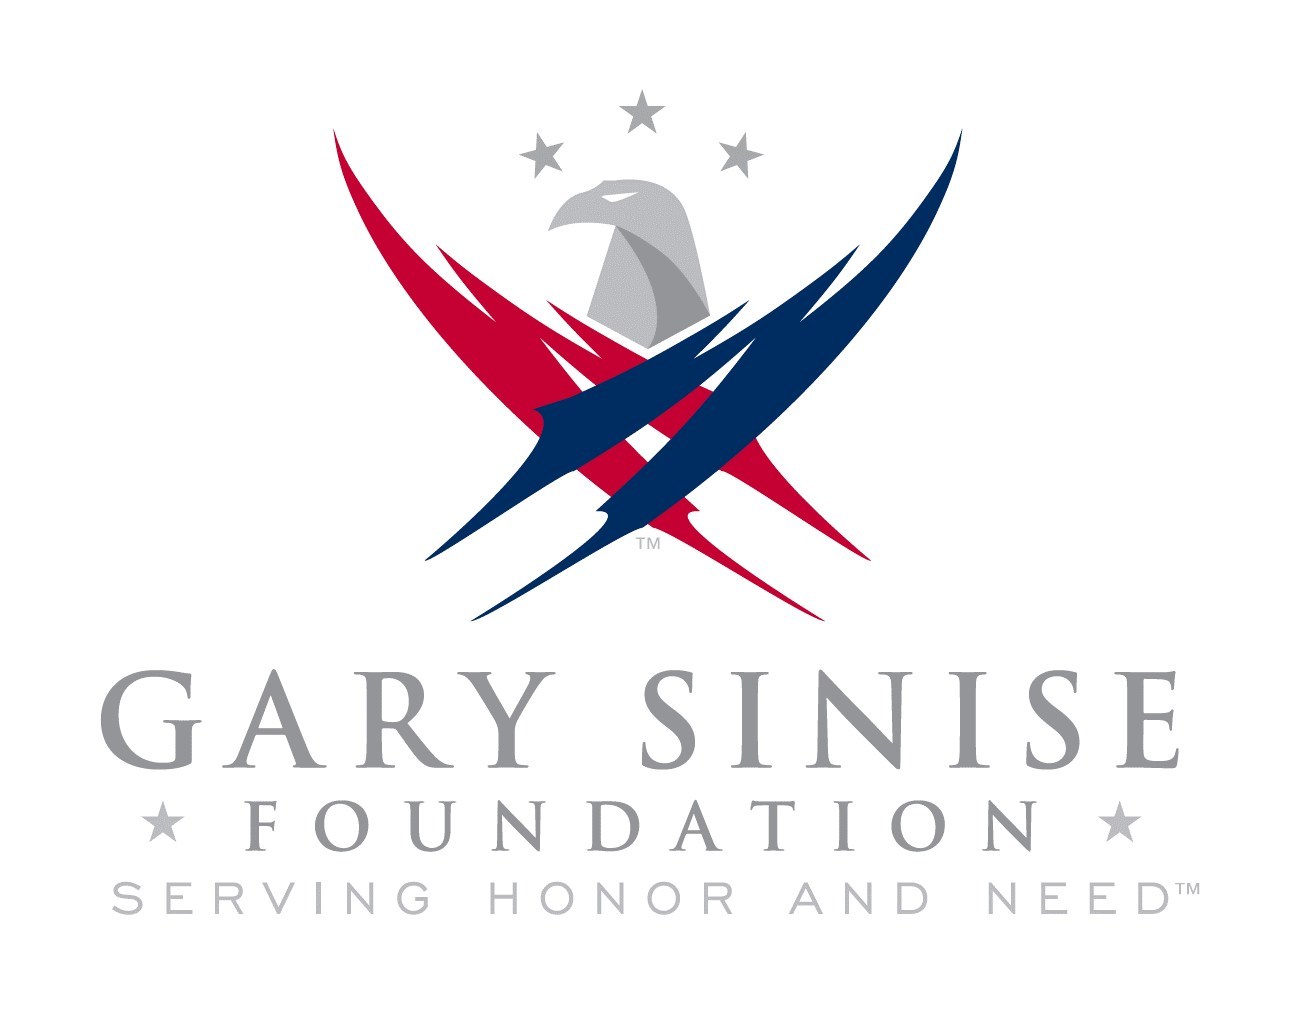 Gary Sinise Foundation Celebrates 7th Anniversary And Establishes The